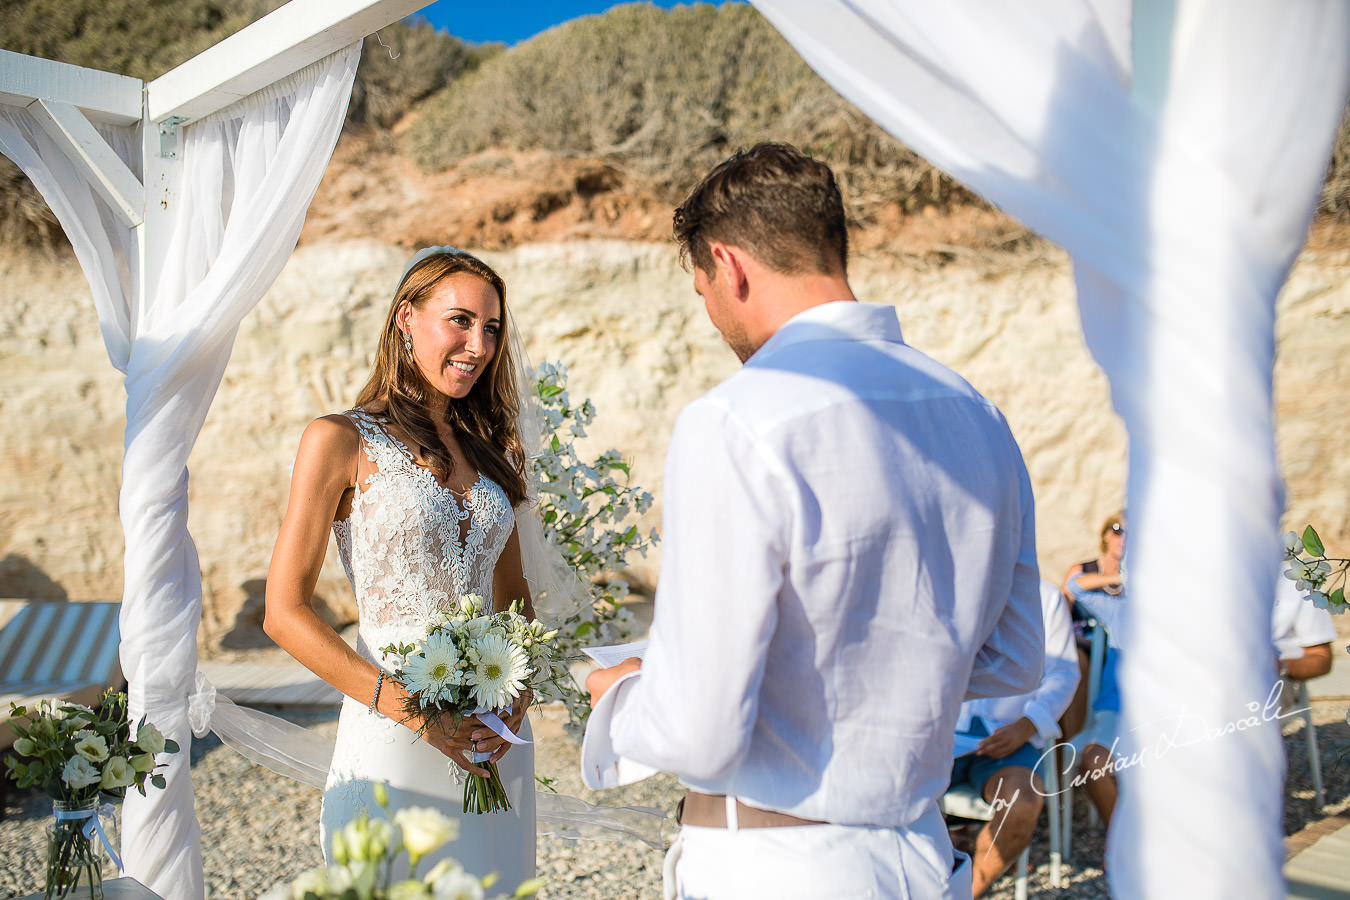 Wedding moments photographed by Cyprus Photographer Cristian Dascalu during a beautiful wedding at Cap St. George in Paphos.